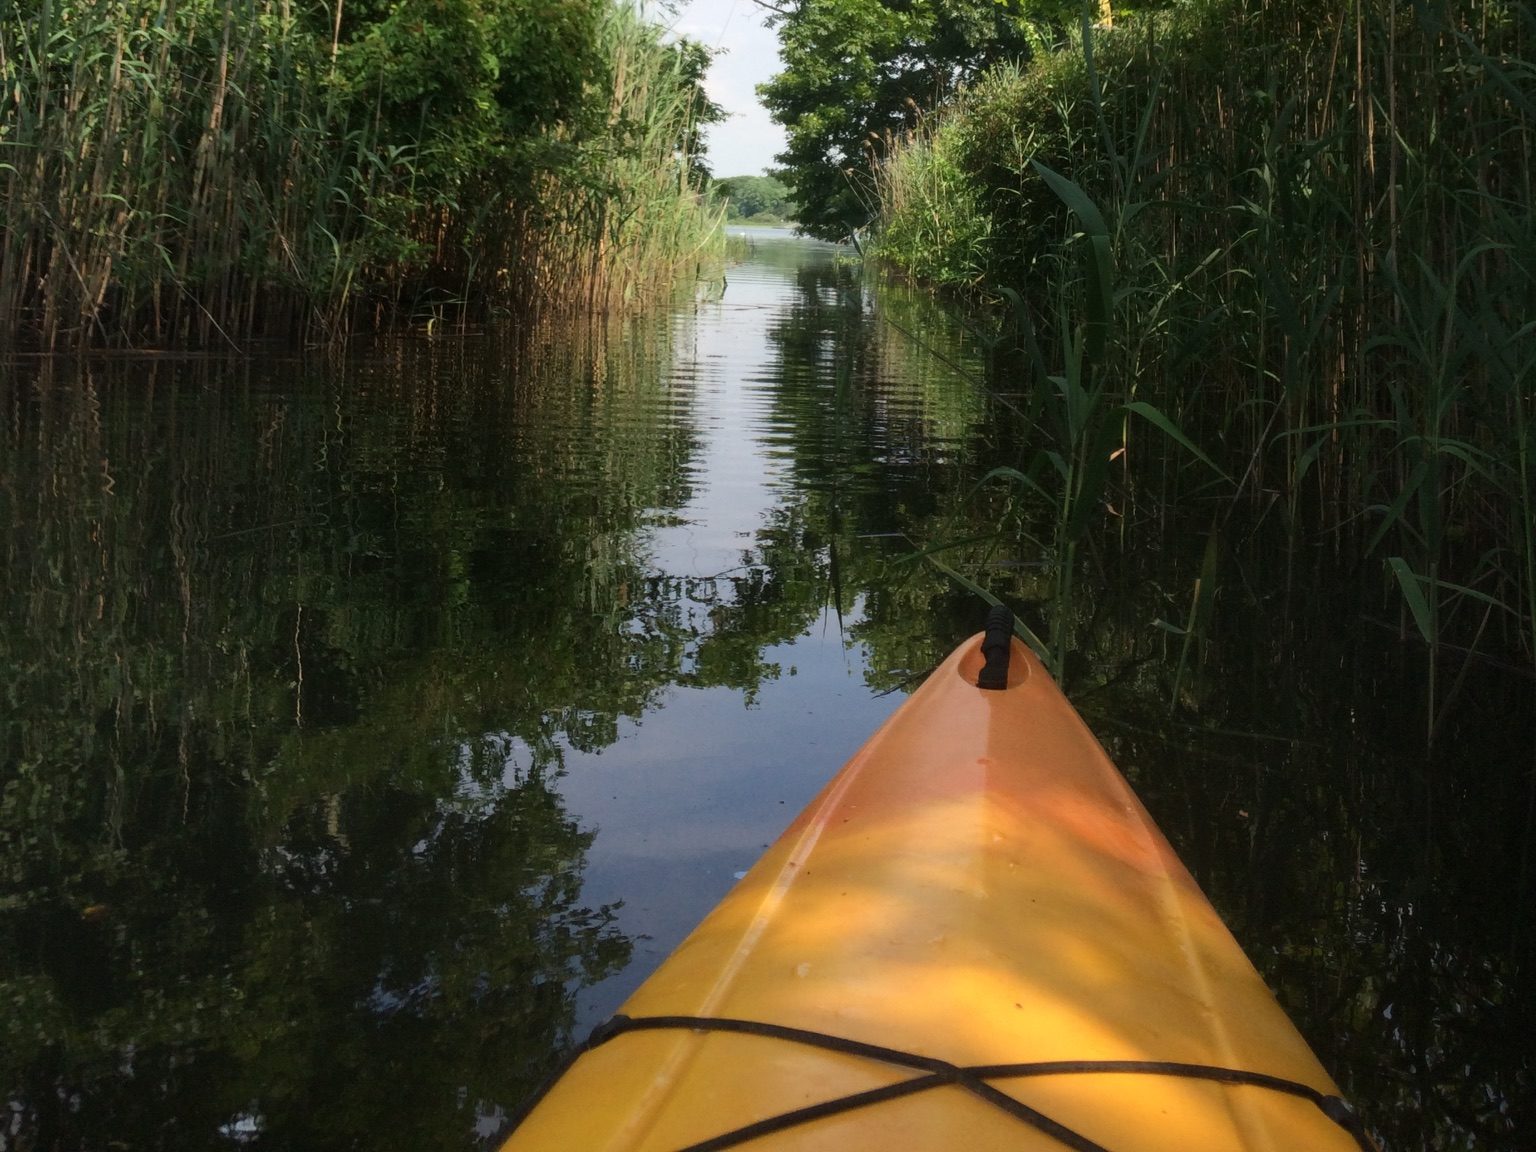 kayak-on-the-water-under-trees